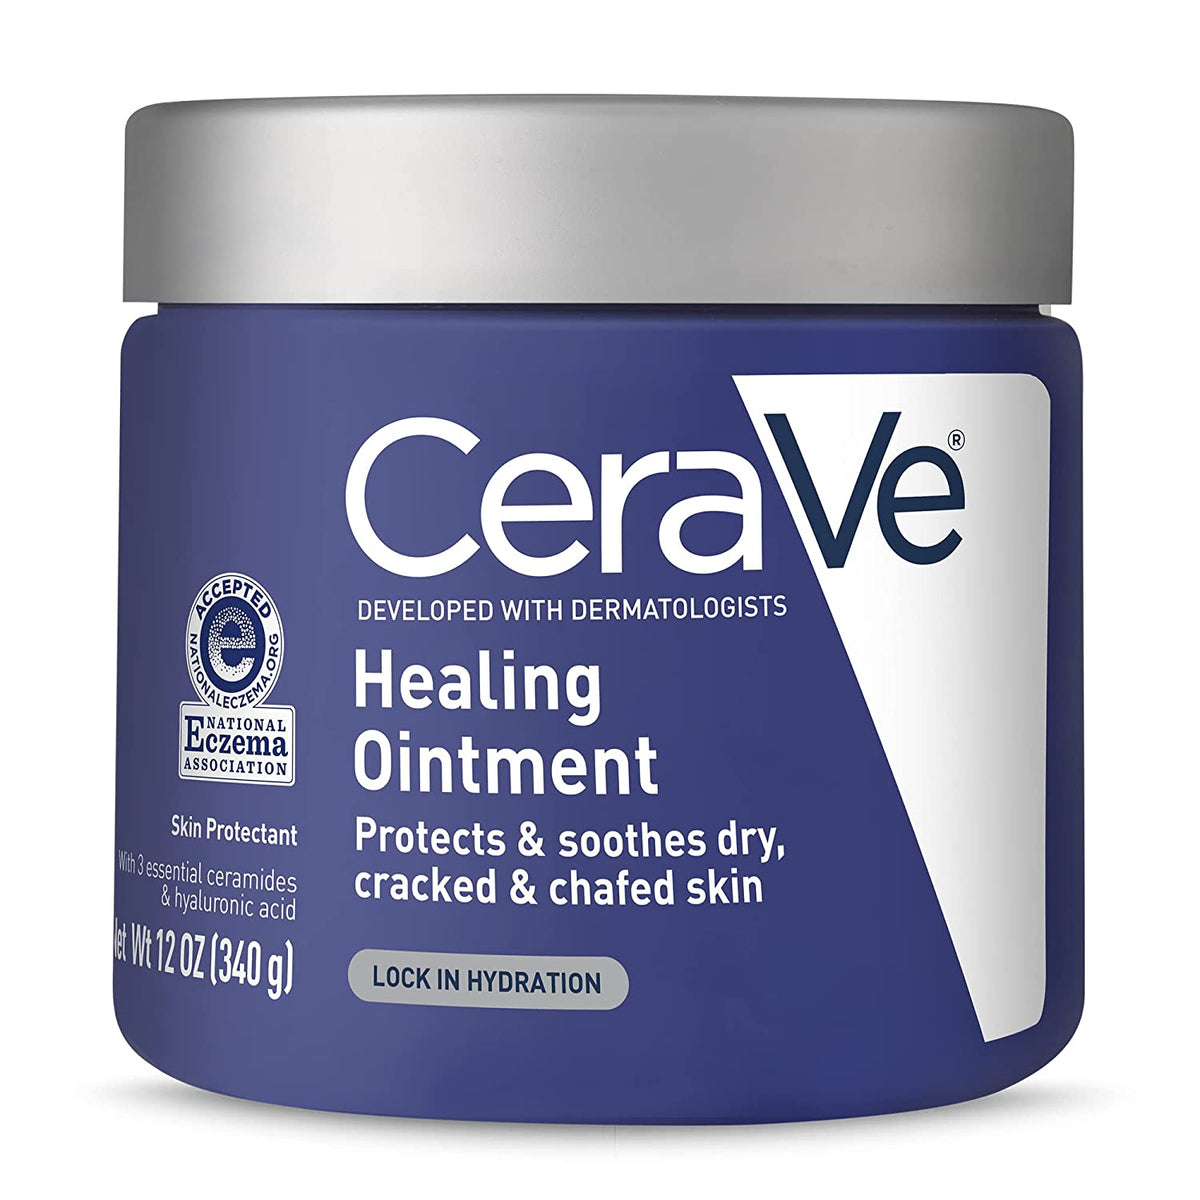 CeraVe Healing Ointment, 12oz